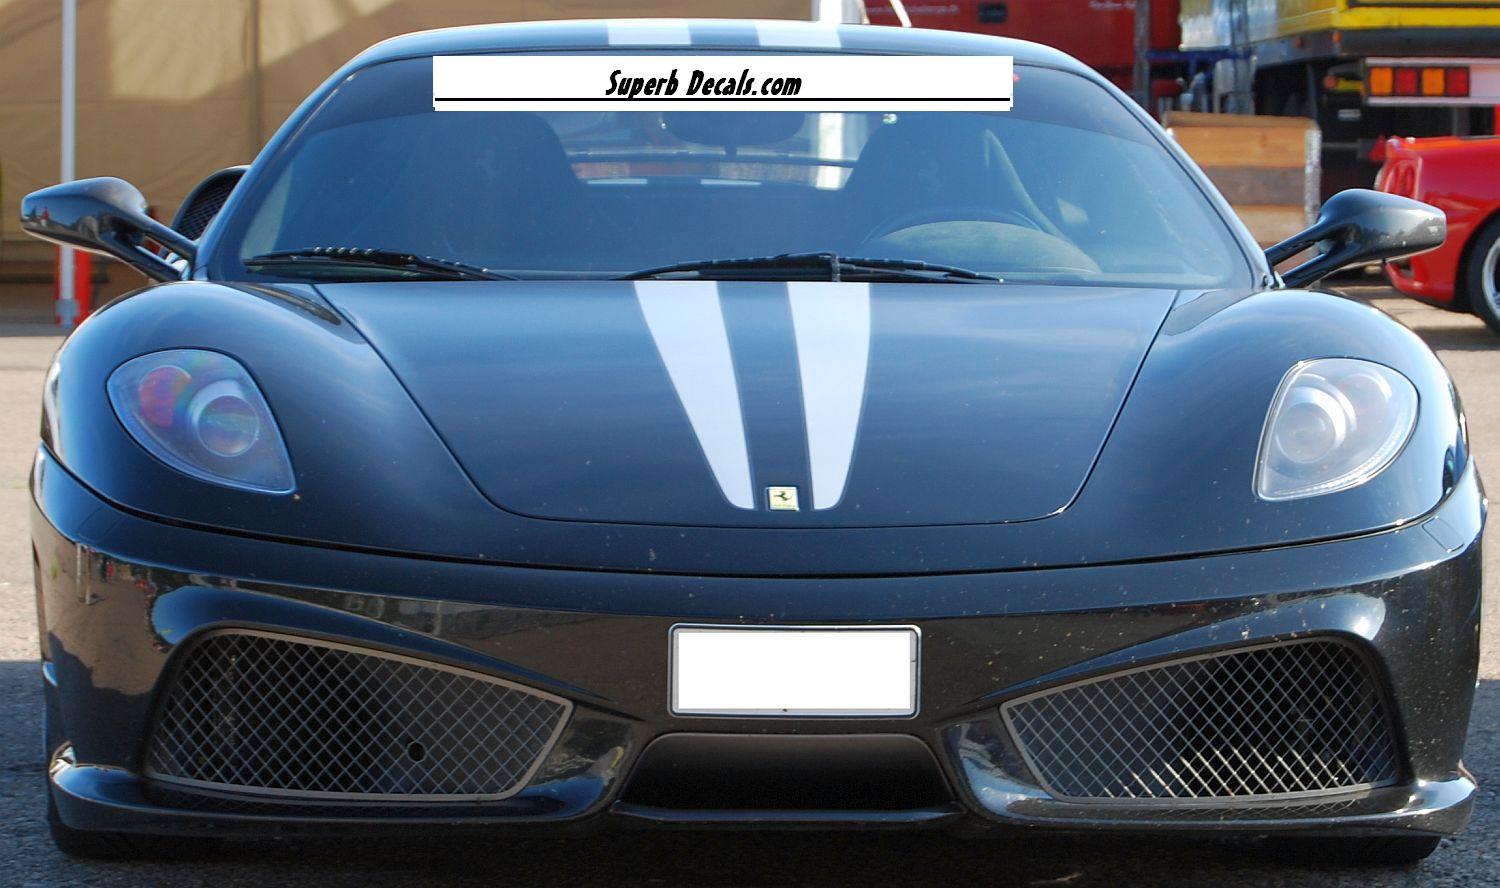 Rally stripes stripe graphics decals fit any yr model Ferrari 430 Scuderia F40Fit all Cars and Trucks